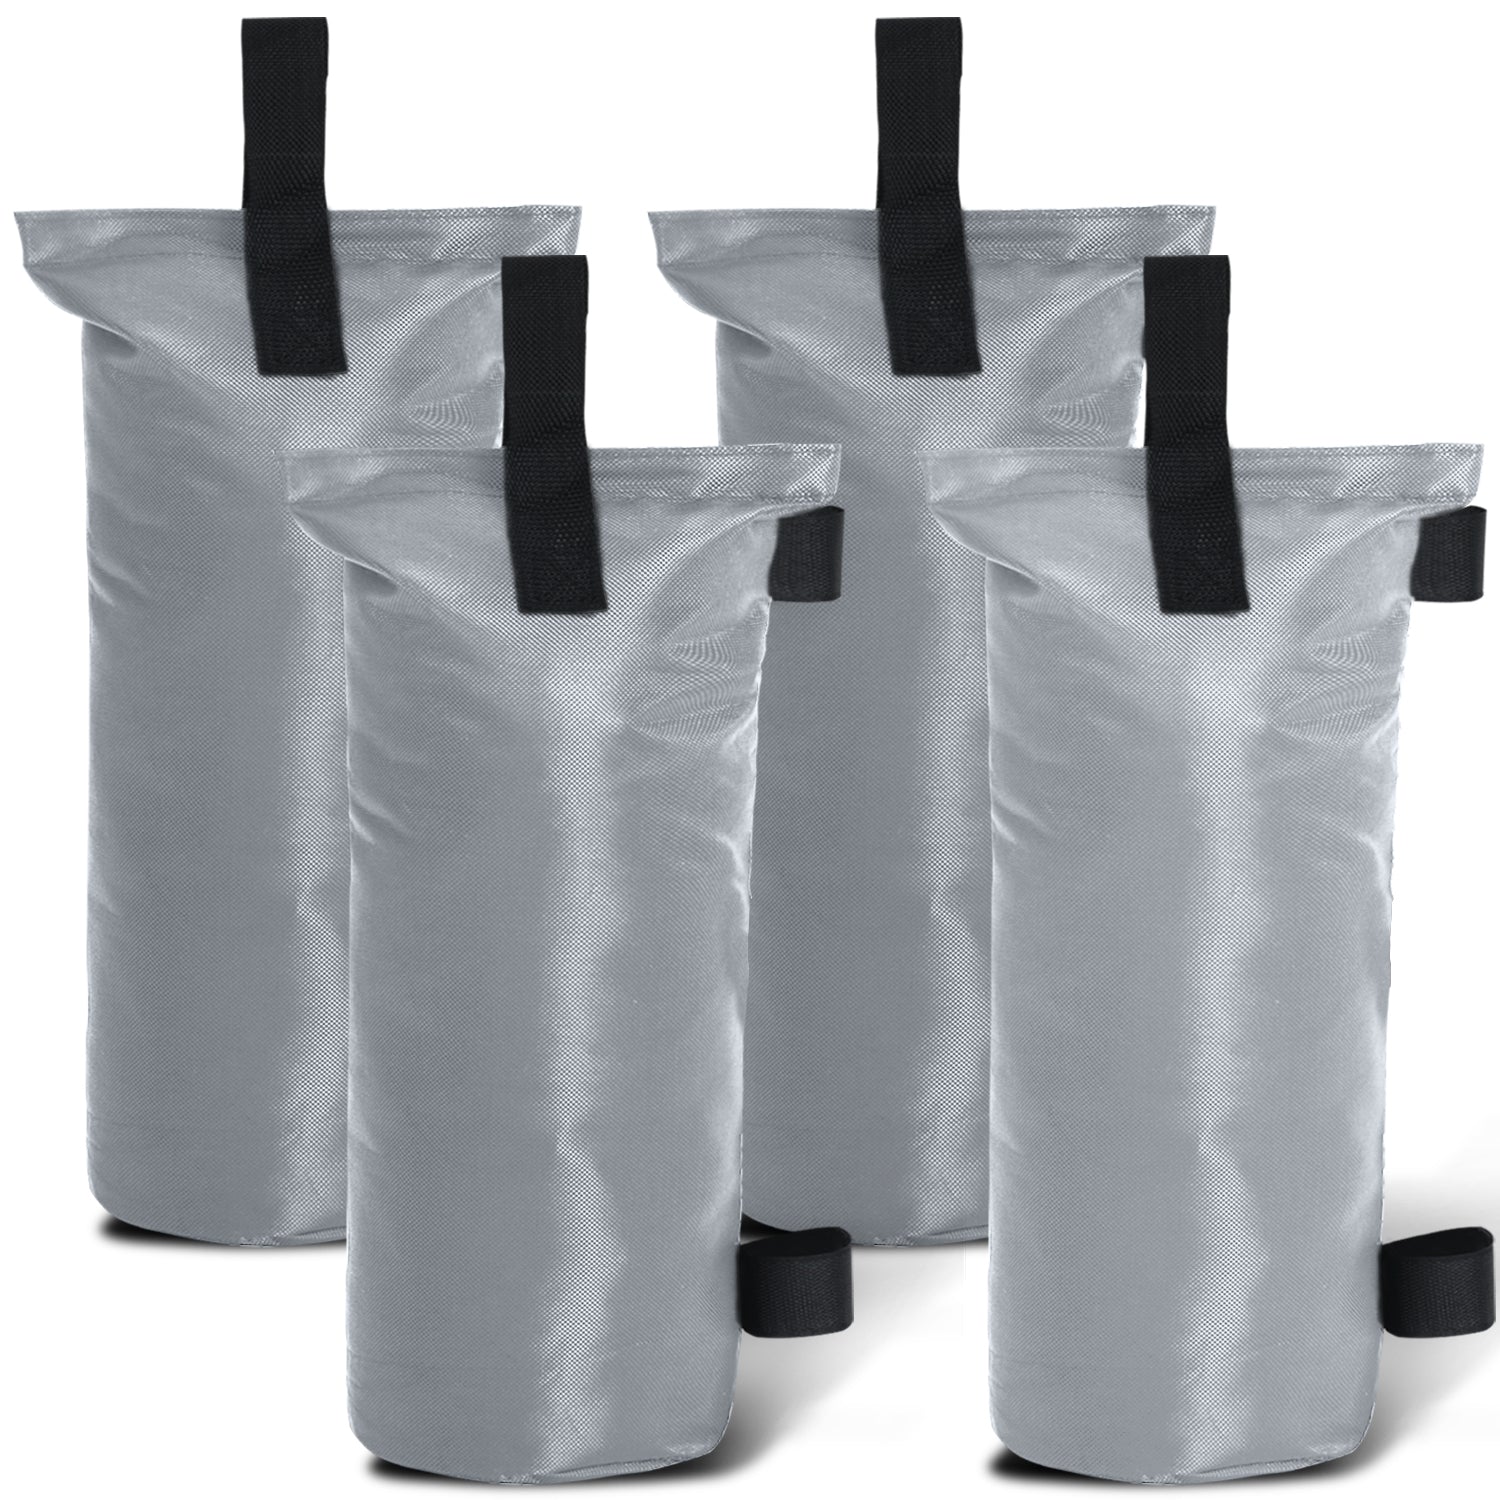 ABCCANOPY 100LBS/112LBS/150LBS Extra Large Canopy Sand Bags, 4-Packs (Without Sand)